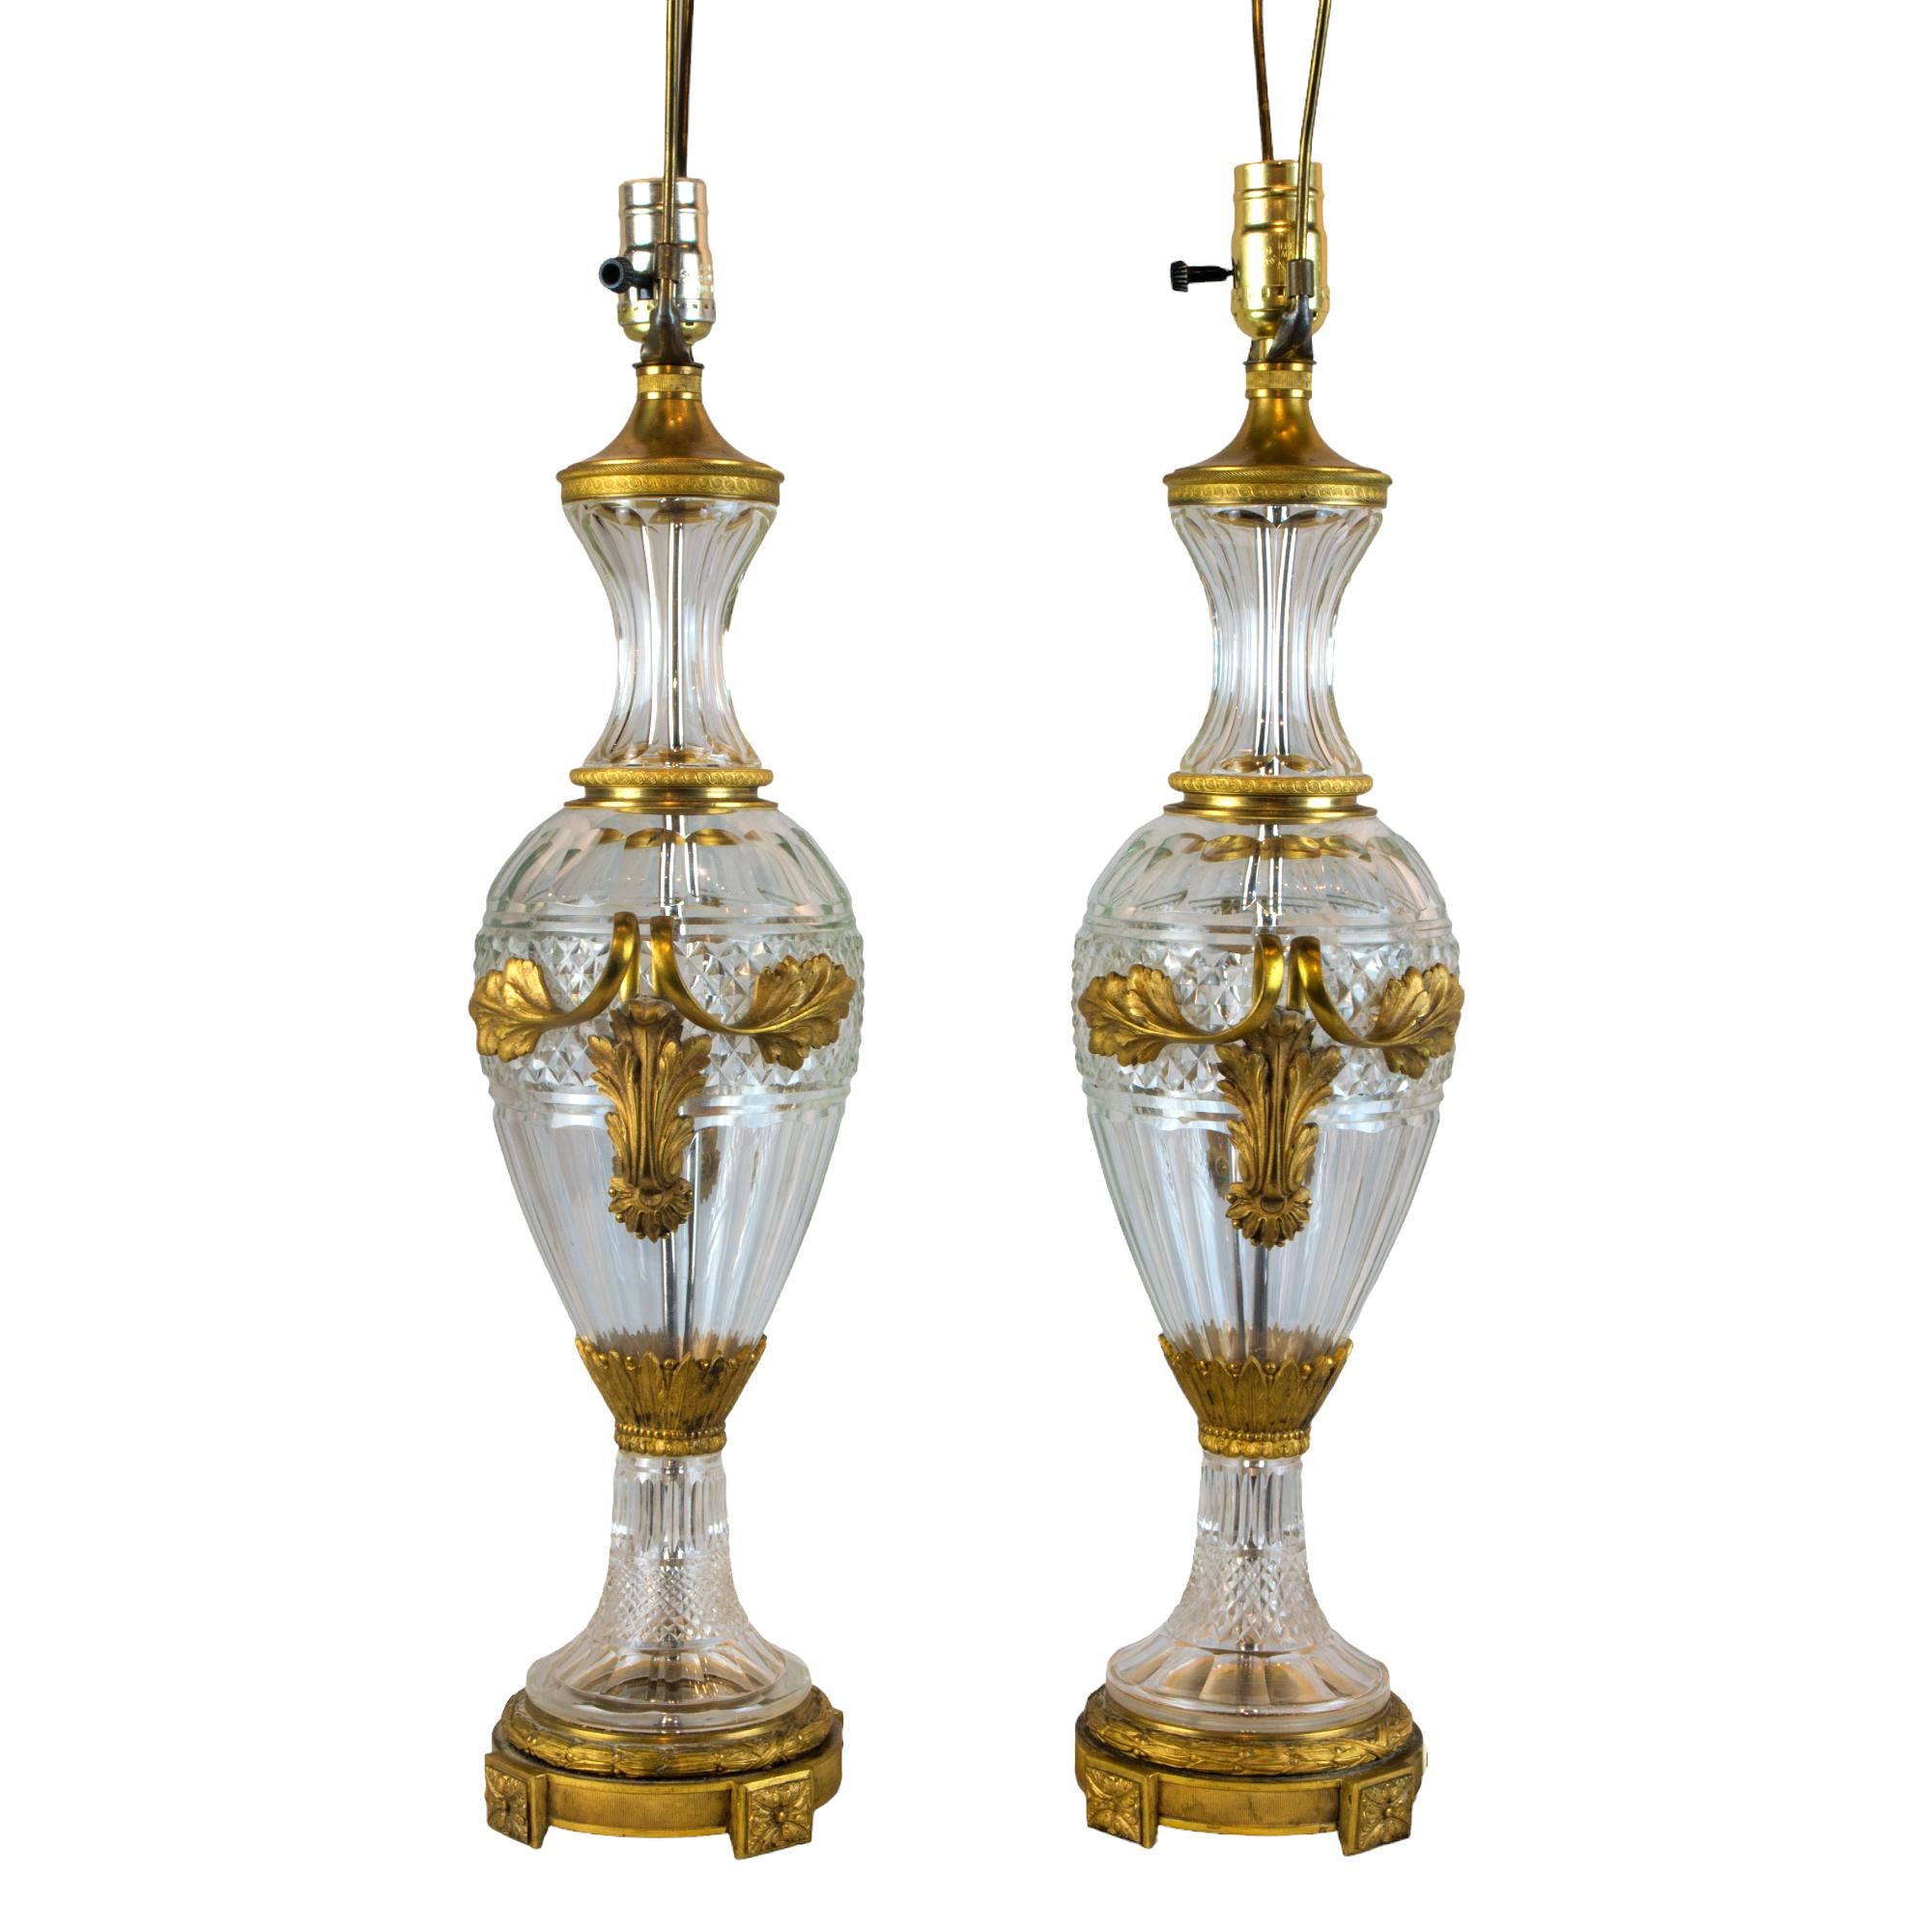 French Pair of Louis XVI Style Gilt-Bronze  Mounted Cut Glass Two-Handled Table Lamps